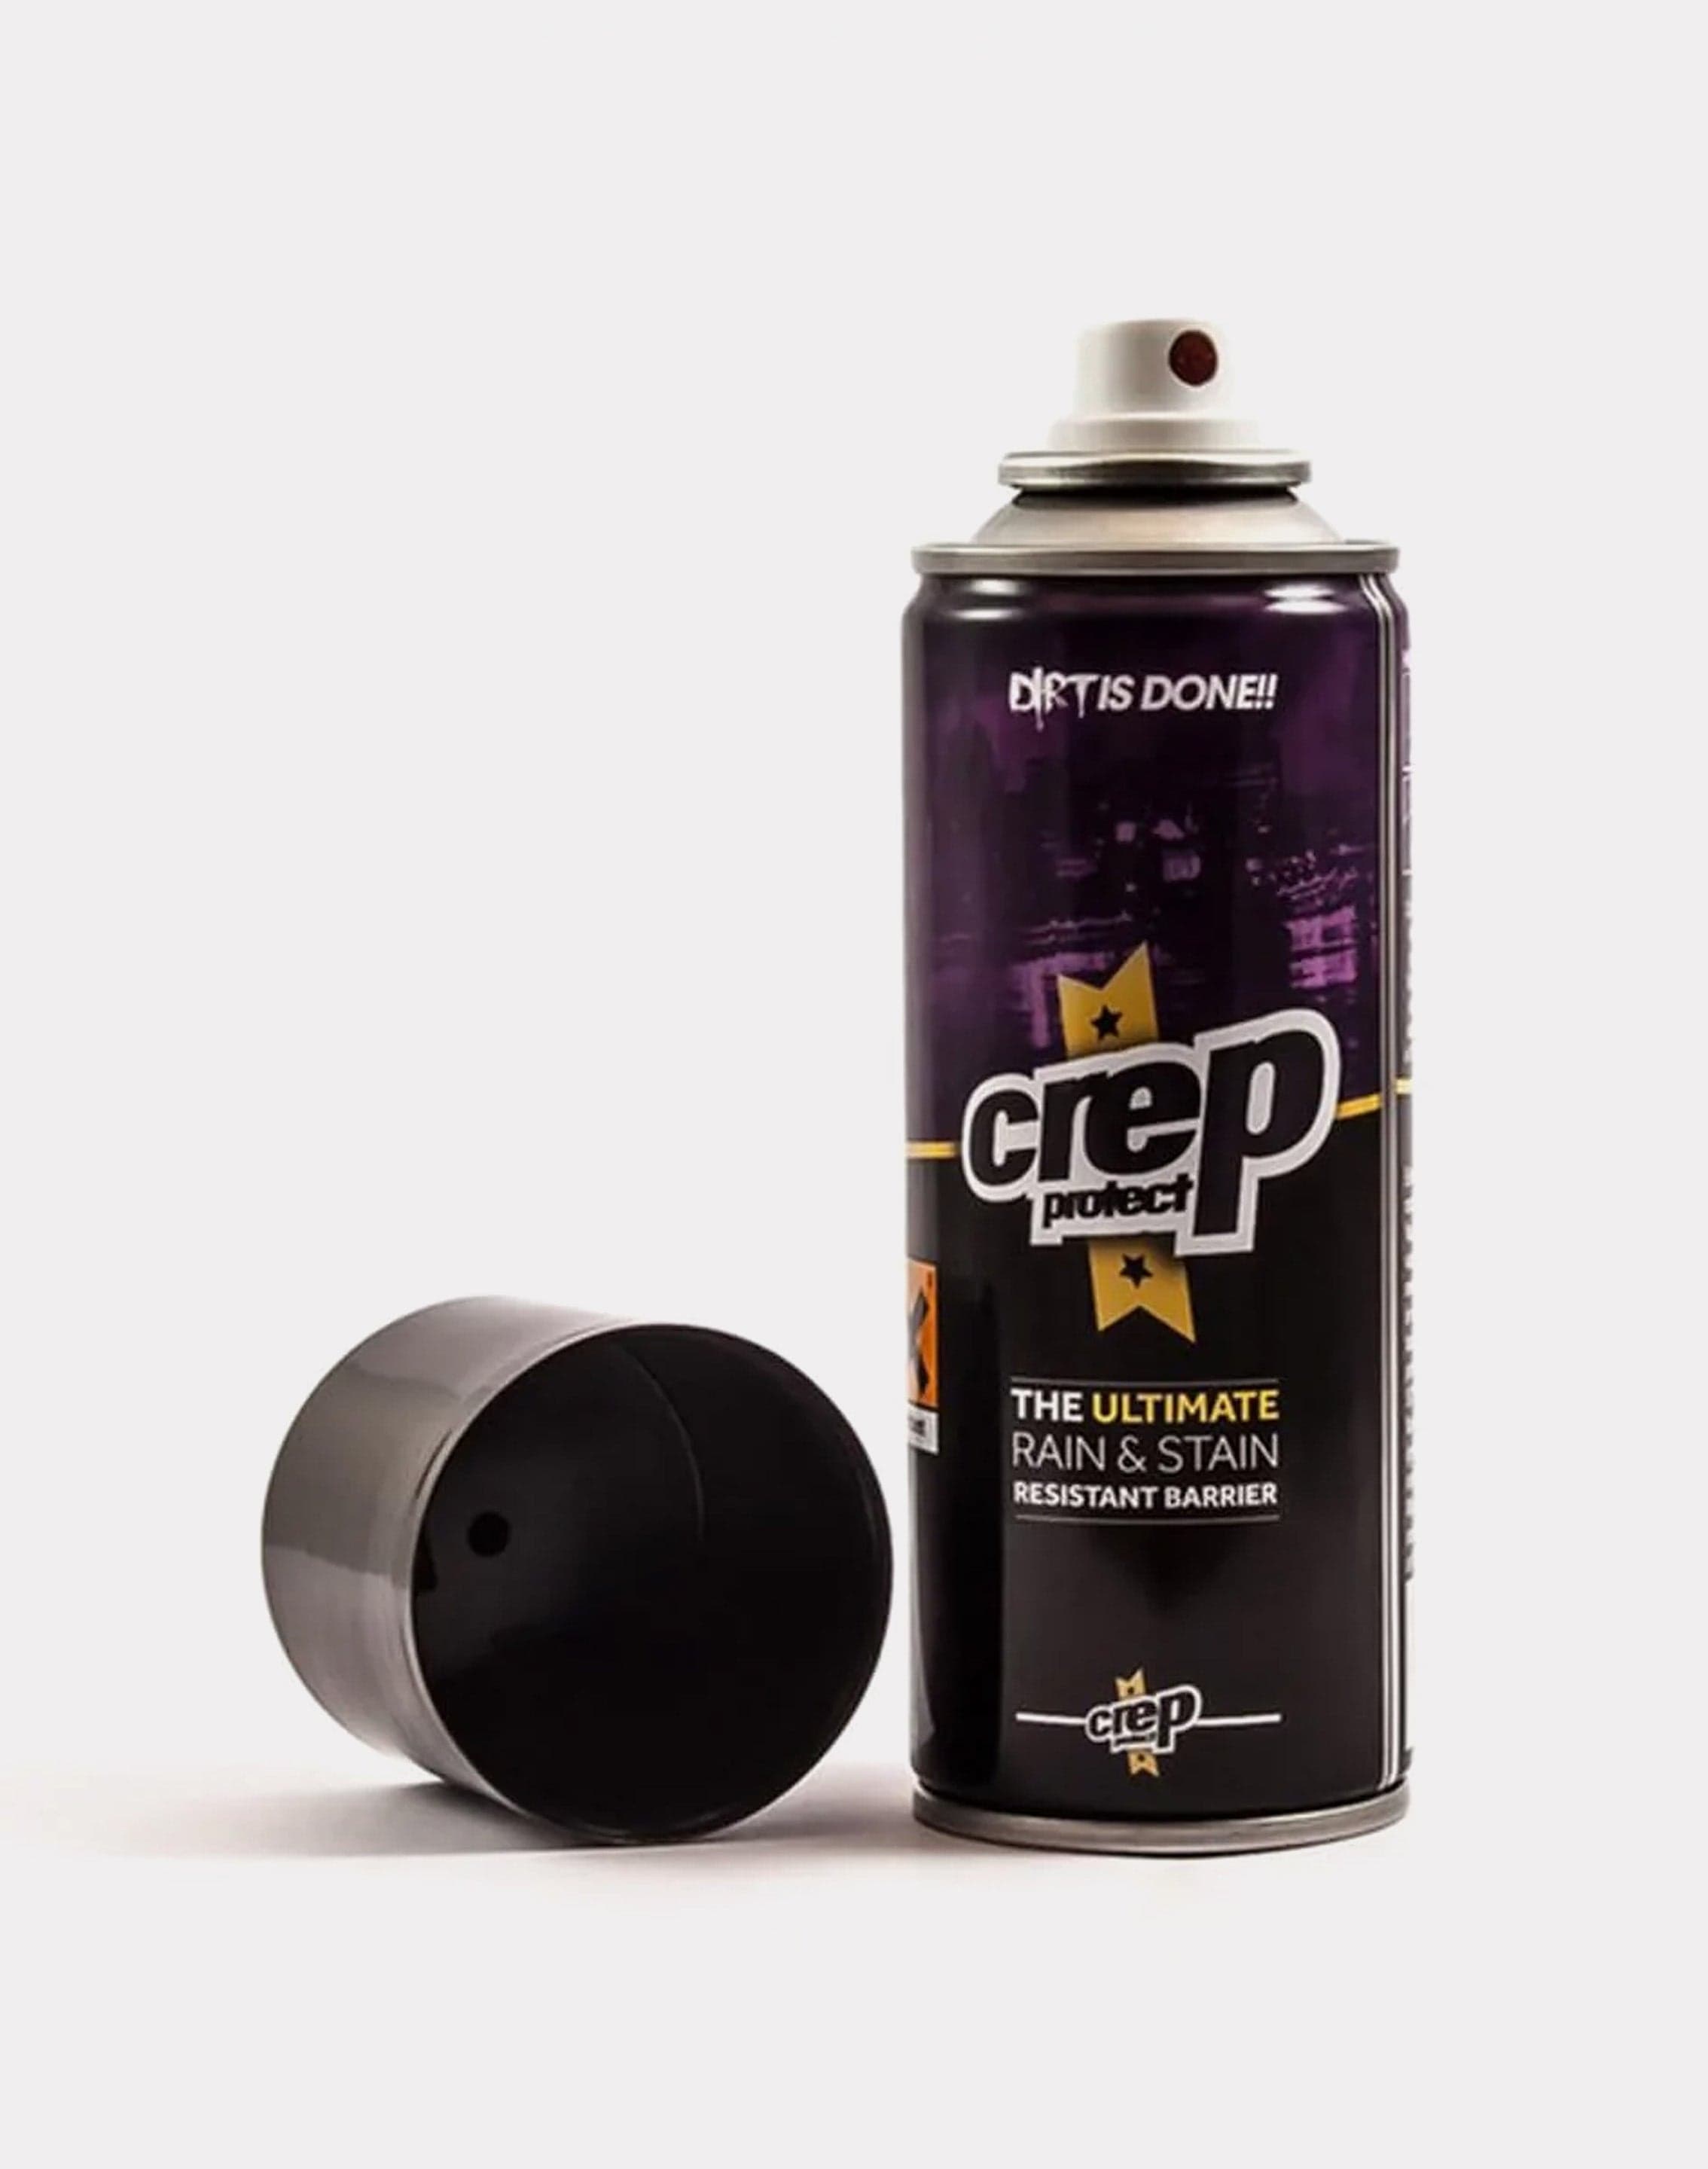 Crep Protect Spray Review: Does the shoe protector work?